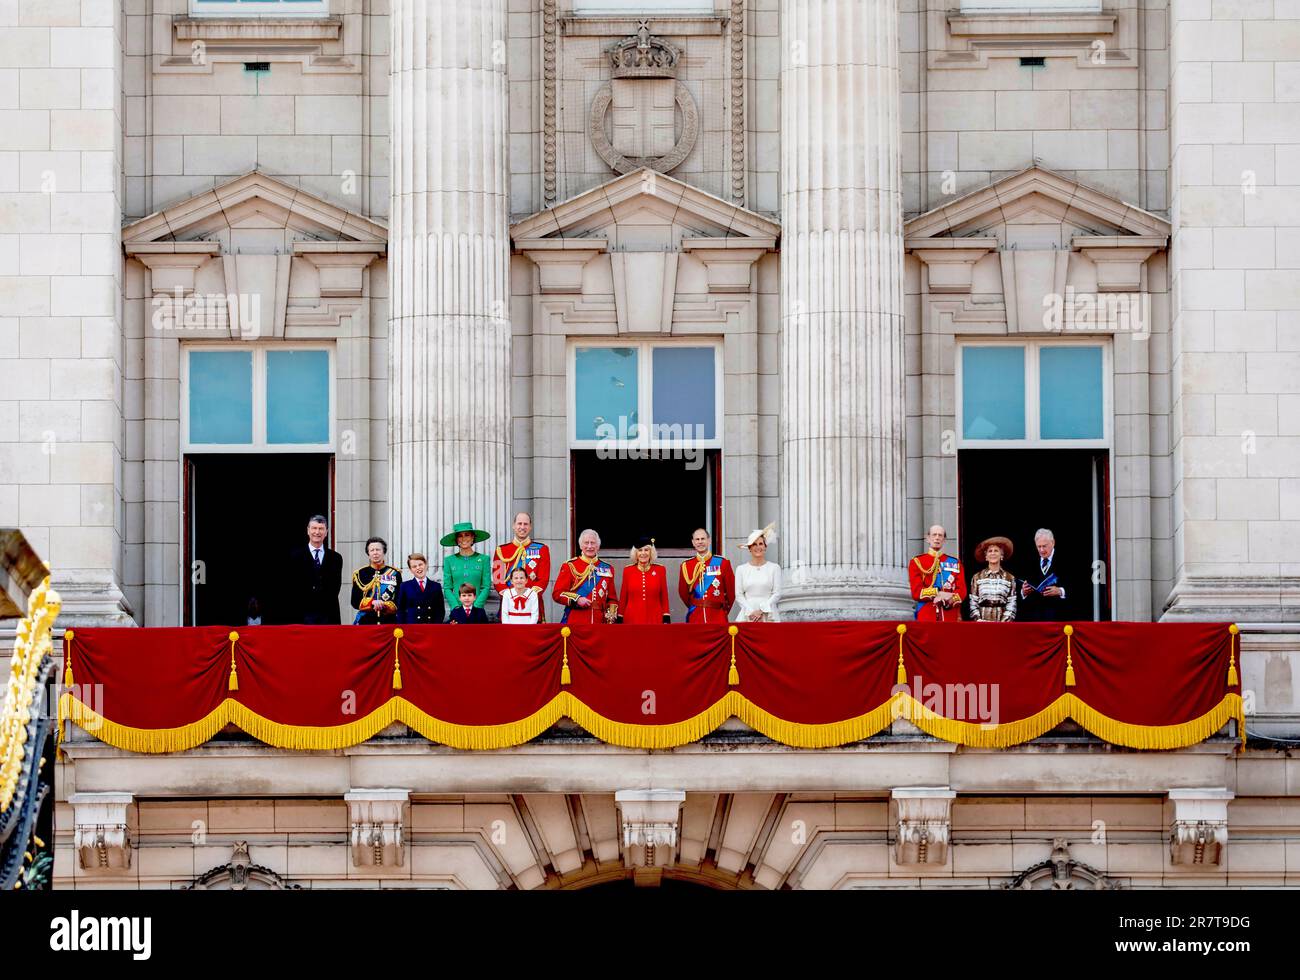 King Charles III and Queen Camilla, William, Prince of Wales and Catherine, Princess of Wales, Prince George of Wales and Princess Charlotte of Wales and Prince Louis of Wales, Anne, Princess Royal and Vice Admiral Sir Tim Laurence, Prince Edward The Duke of Kent, Prince Richard and Birgitte Duke and Duchess of Gloucester at the balcony of Buckingham Palace in London, on June 17, 2023, after attended Trooping the Colour (The Kings Birthday Parade) at the Horse Guards Parade Photo: Albert Nieboer/Netherlands OUT/Point De Vue OUT Stock Photo